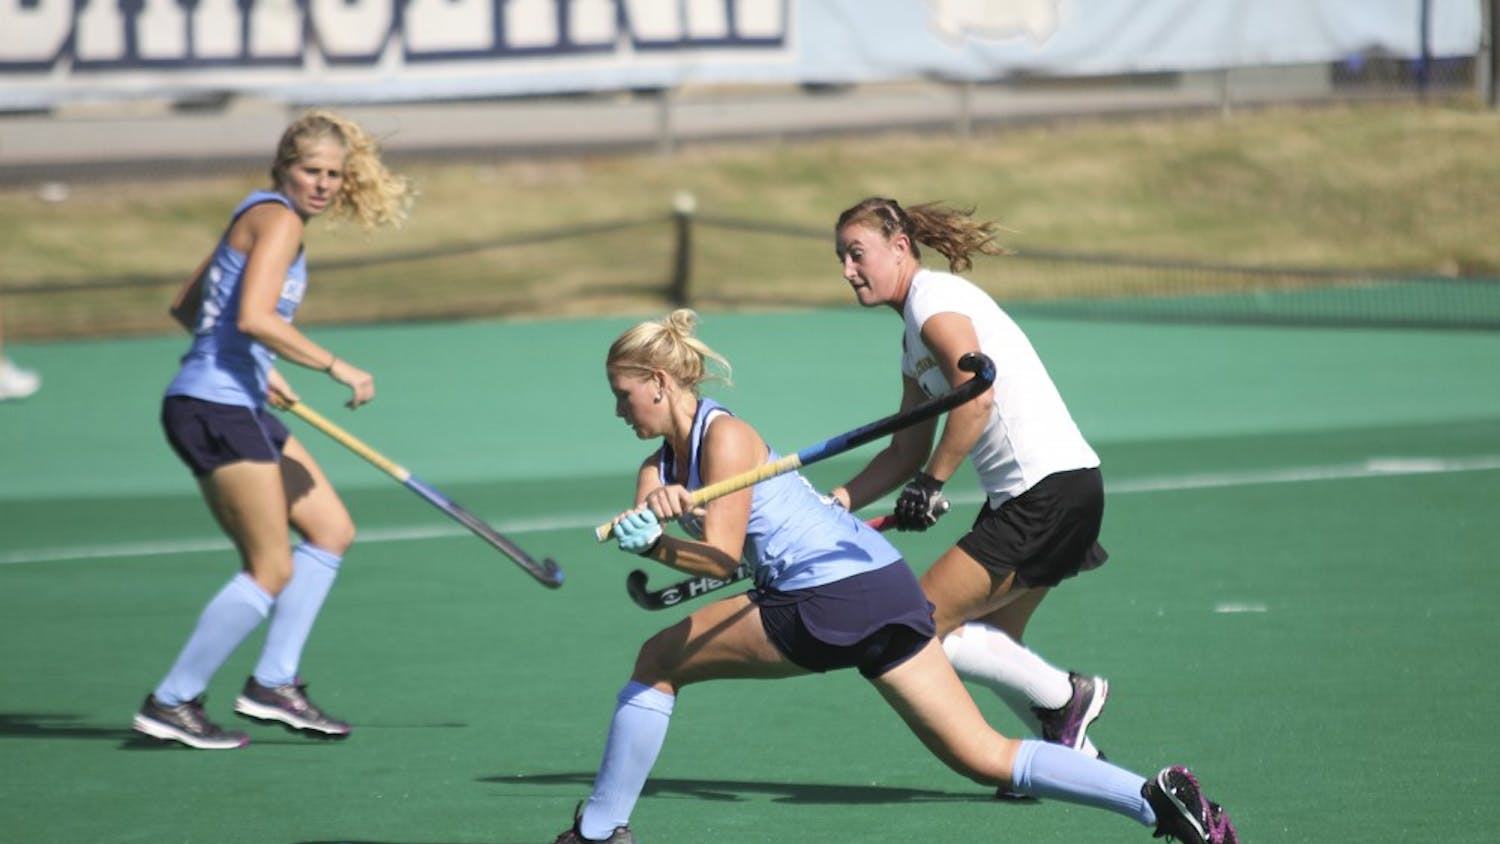 UNC midfielder Catherine Hayden (8) winds up for a shot against Appalachian State on Sunday.